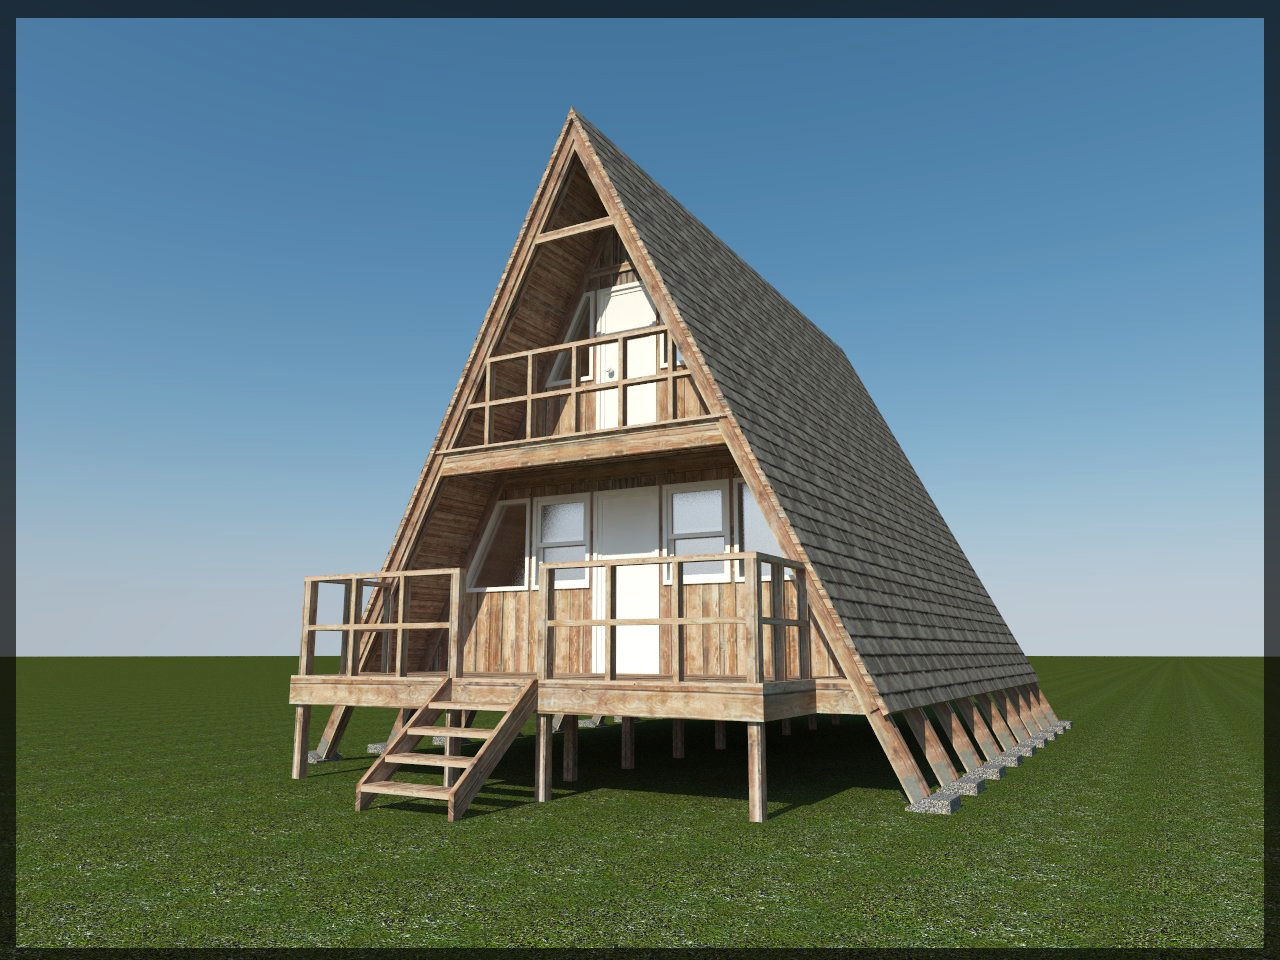 DIY Cabins Plans
 DIY a Frame Cabin Plans Frame a Small Cabin easy to build